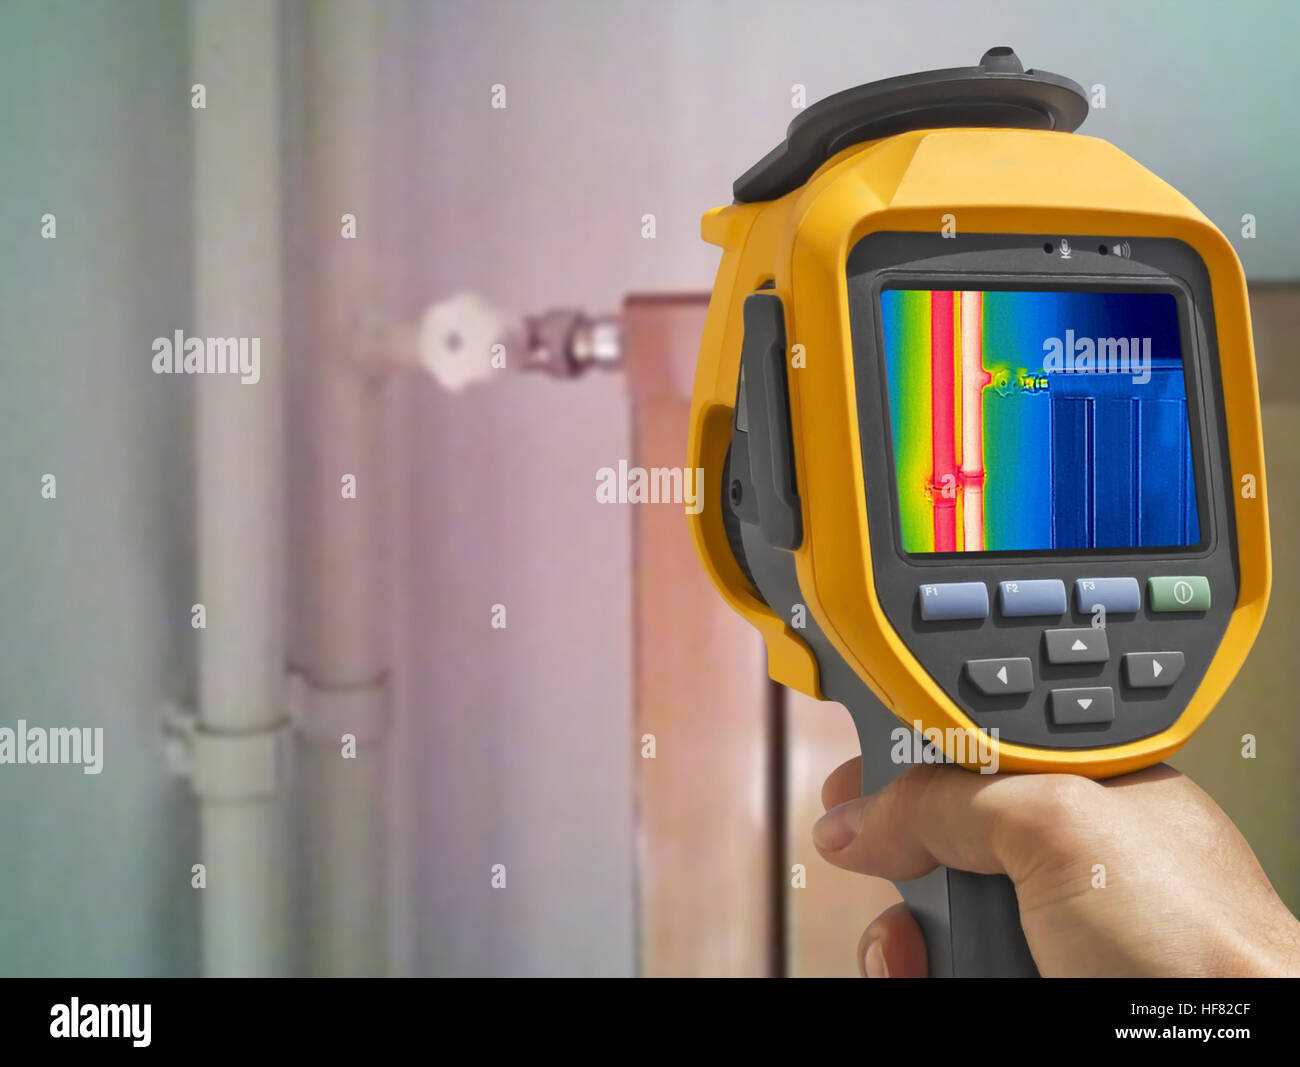 Recording closed Radiator Heater with Infrared Thermal Camera Stock Photo